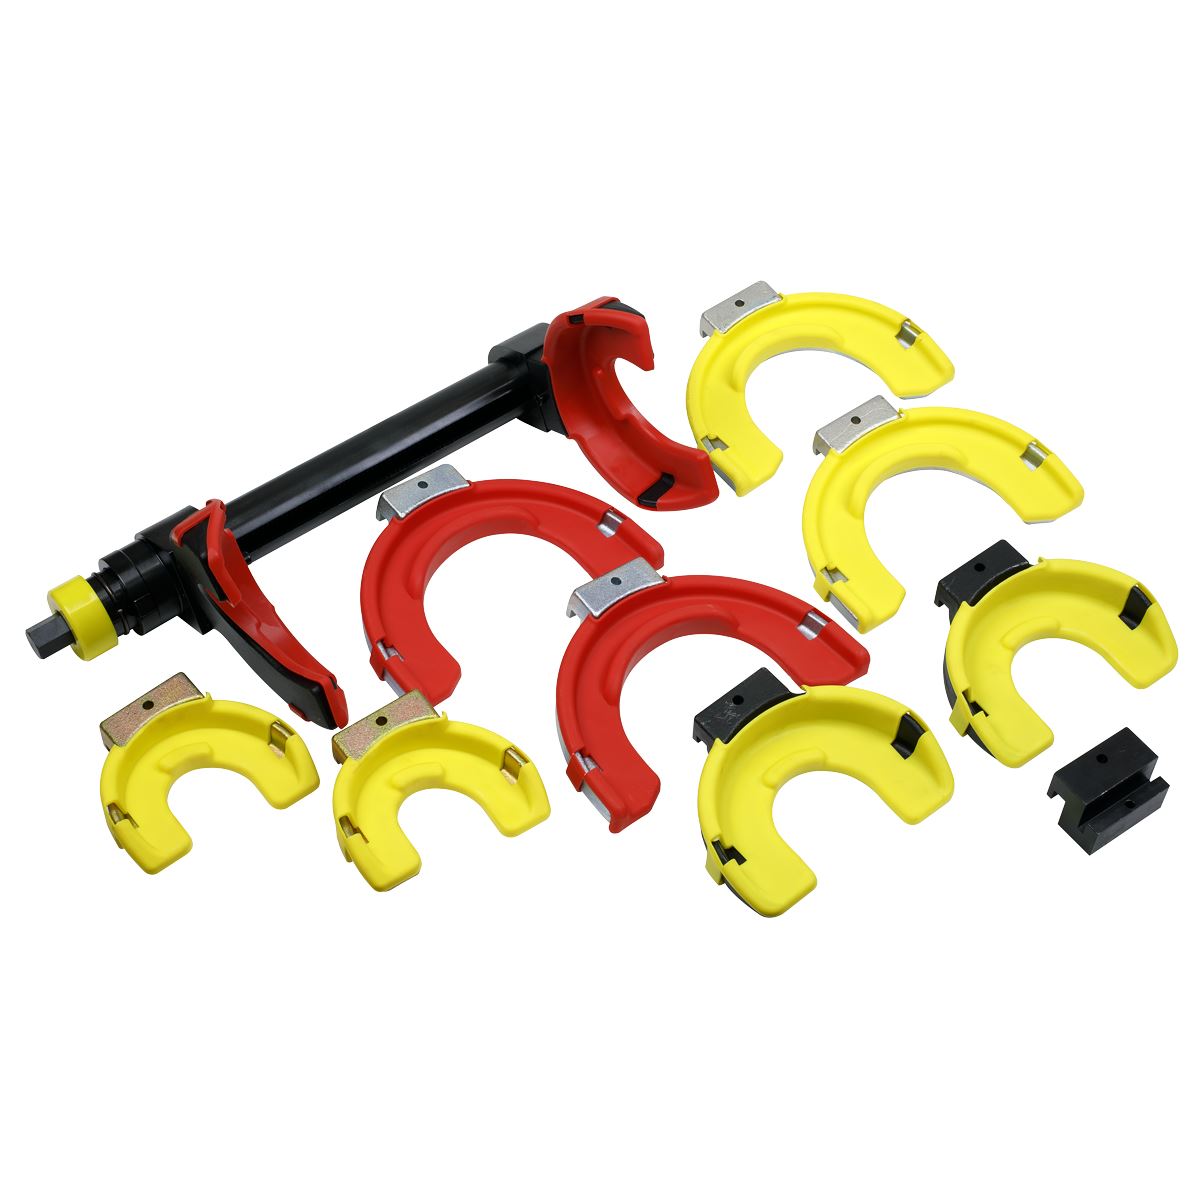 Sealey Right-Hand/Left-Hand - Professional Coil Spring Compressor Set